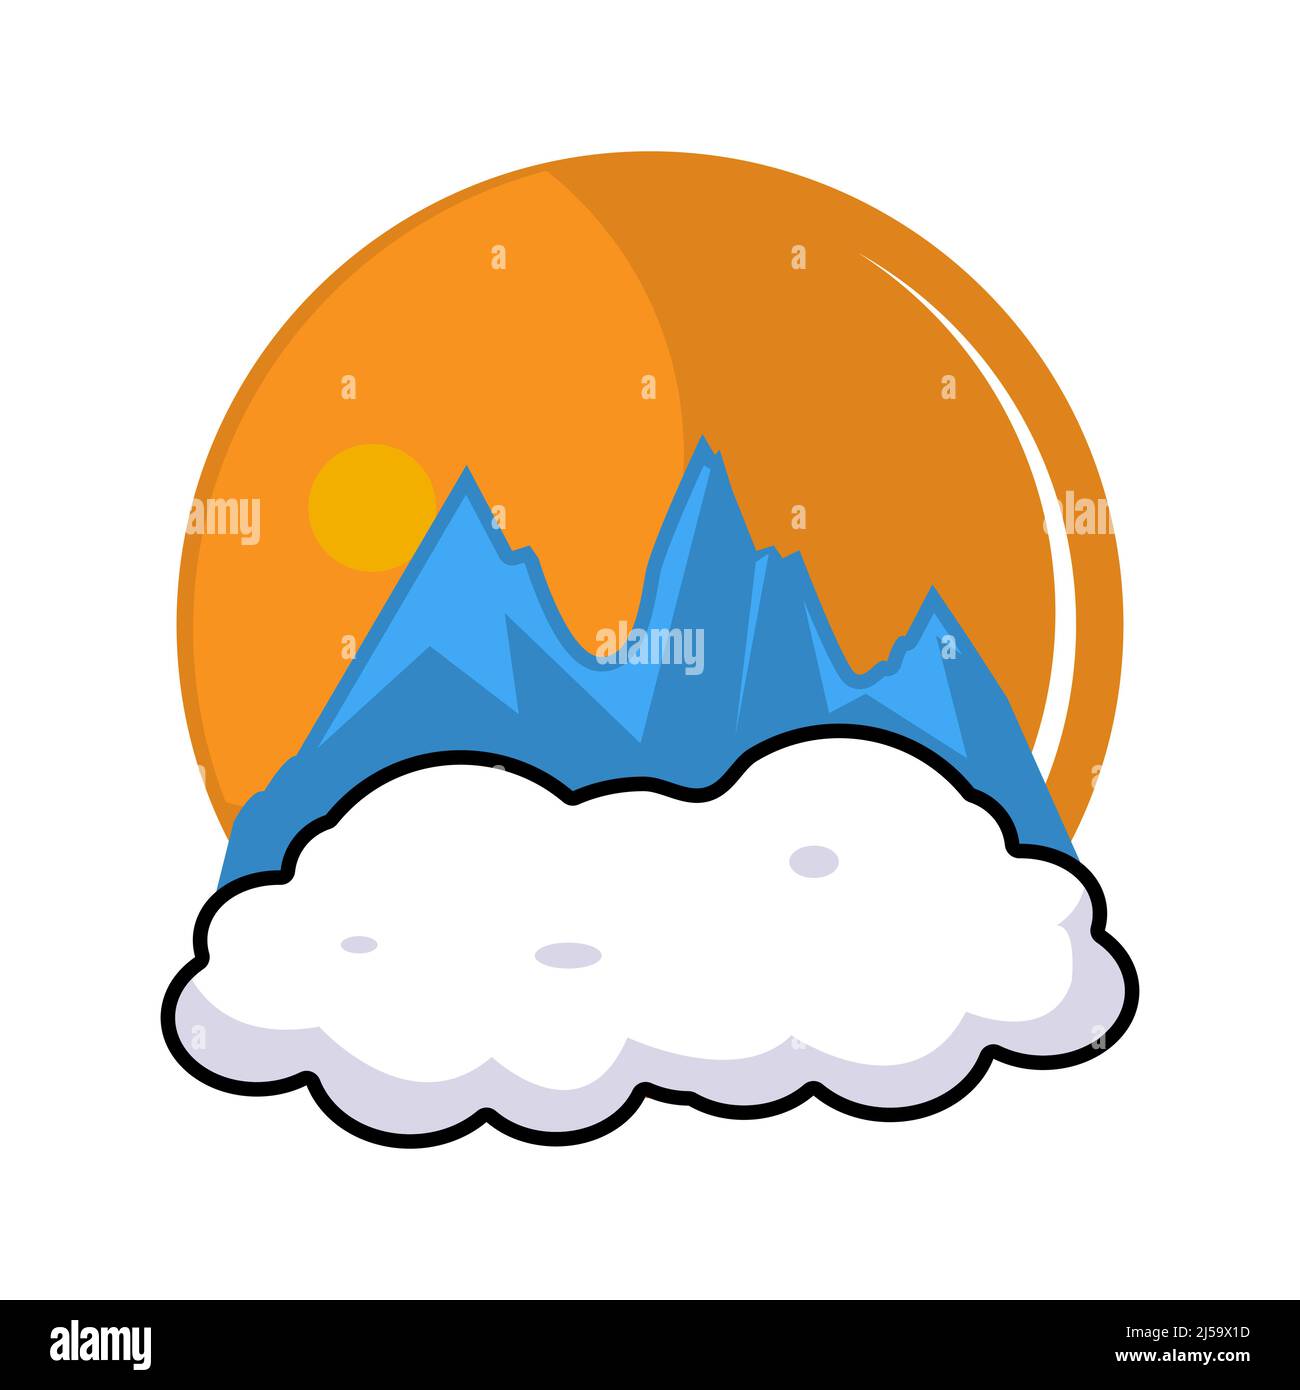 Mountain Logo with full moon and cloud. Flat design. Vector Illustration on white background. Stock Vector